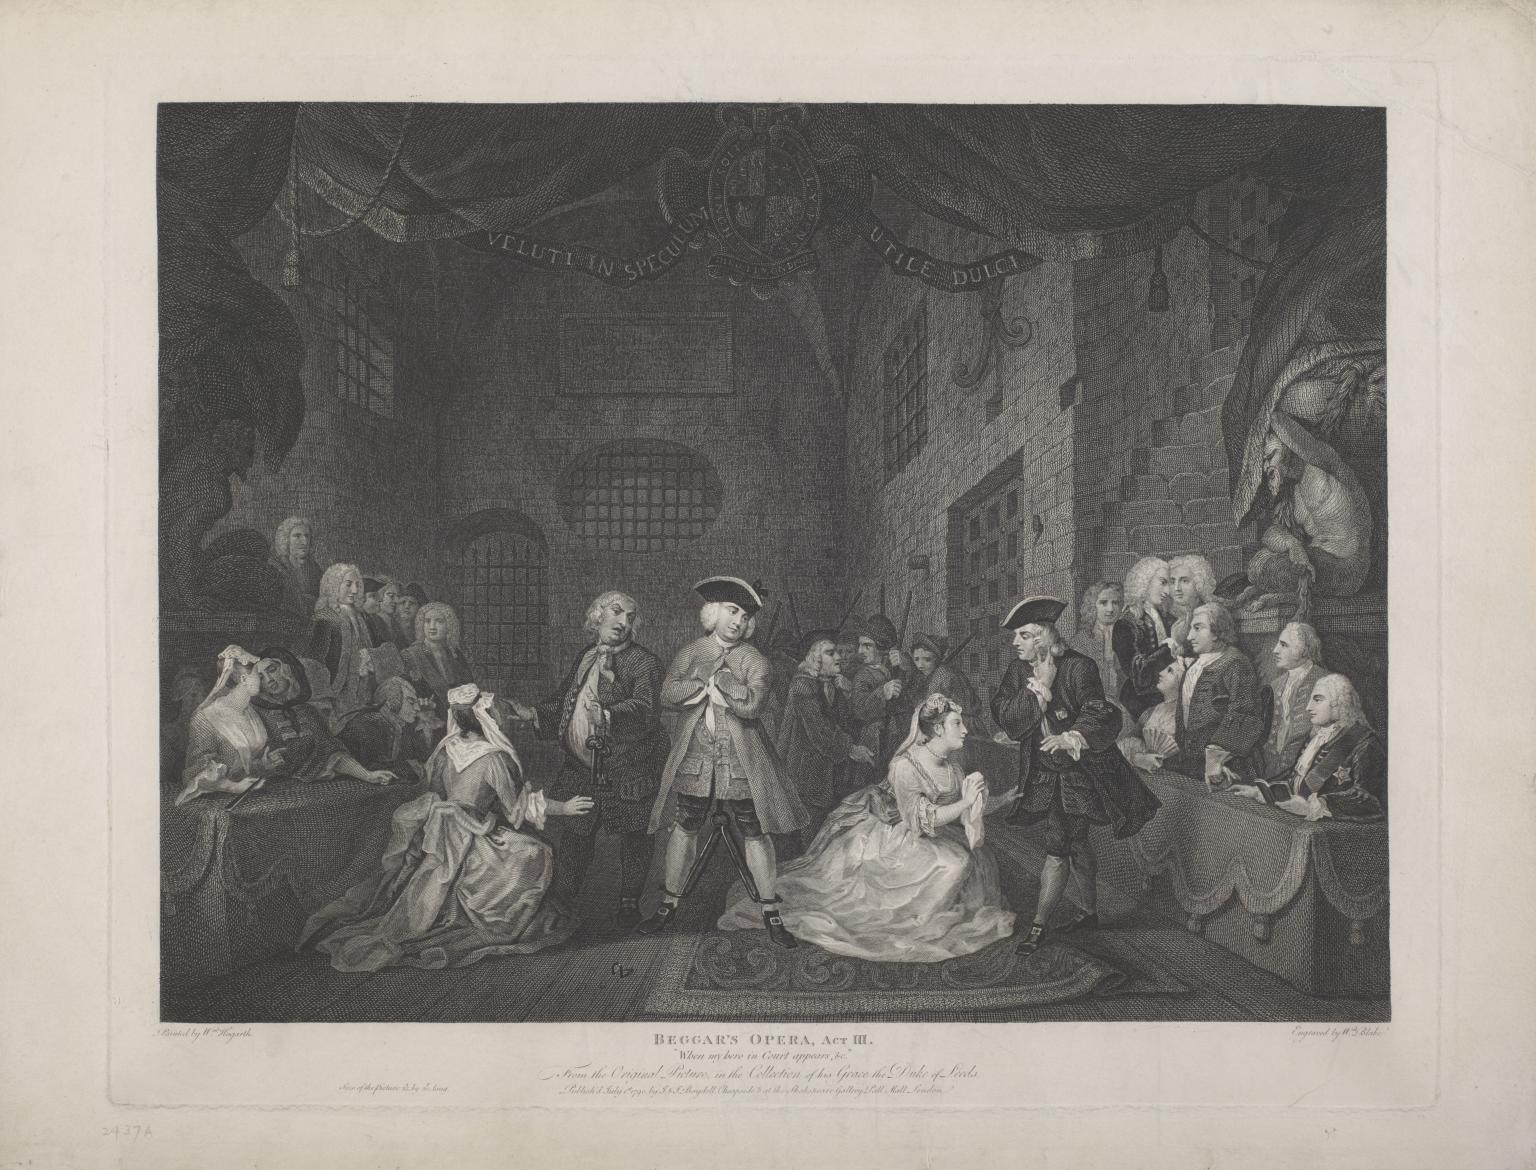 Beggars Opera, Act III, engraved by William Blake, prints after William Hogarth, 1790 Tate